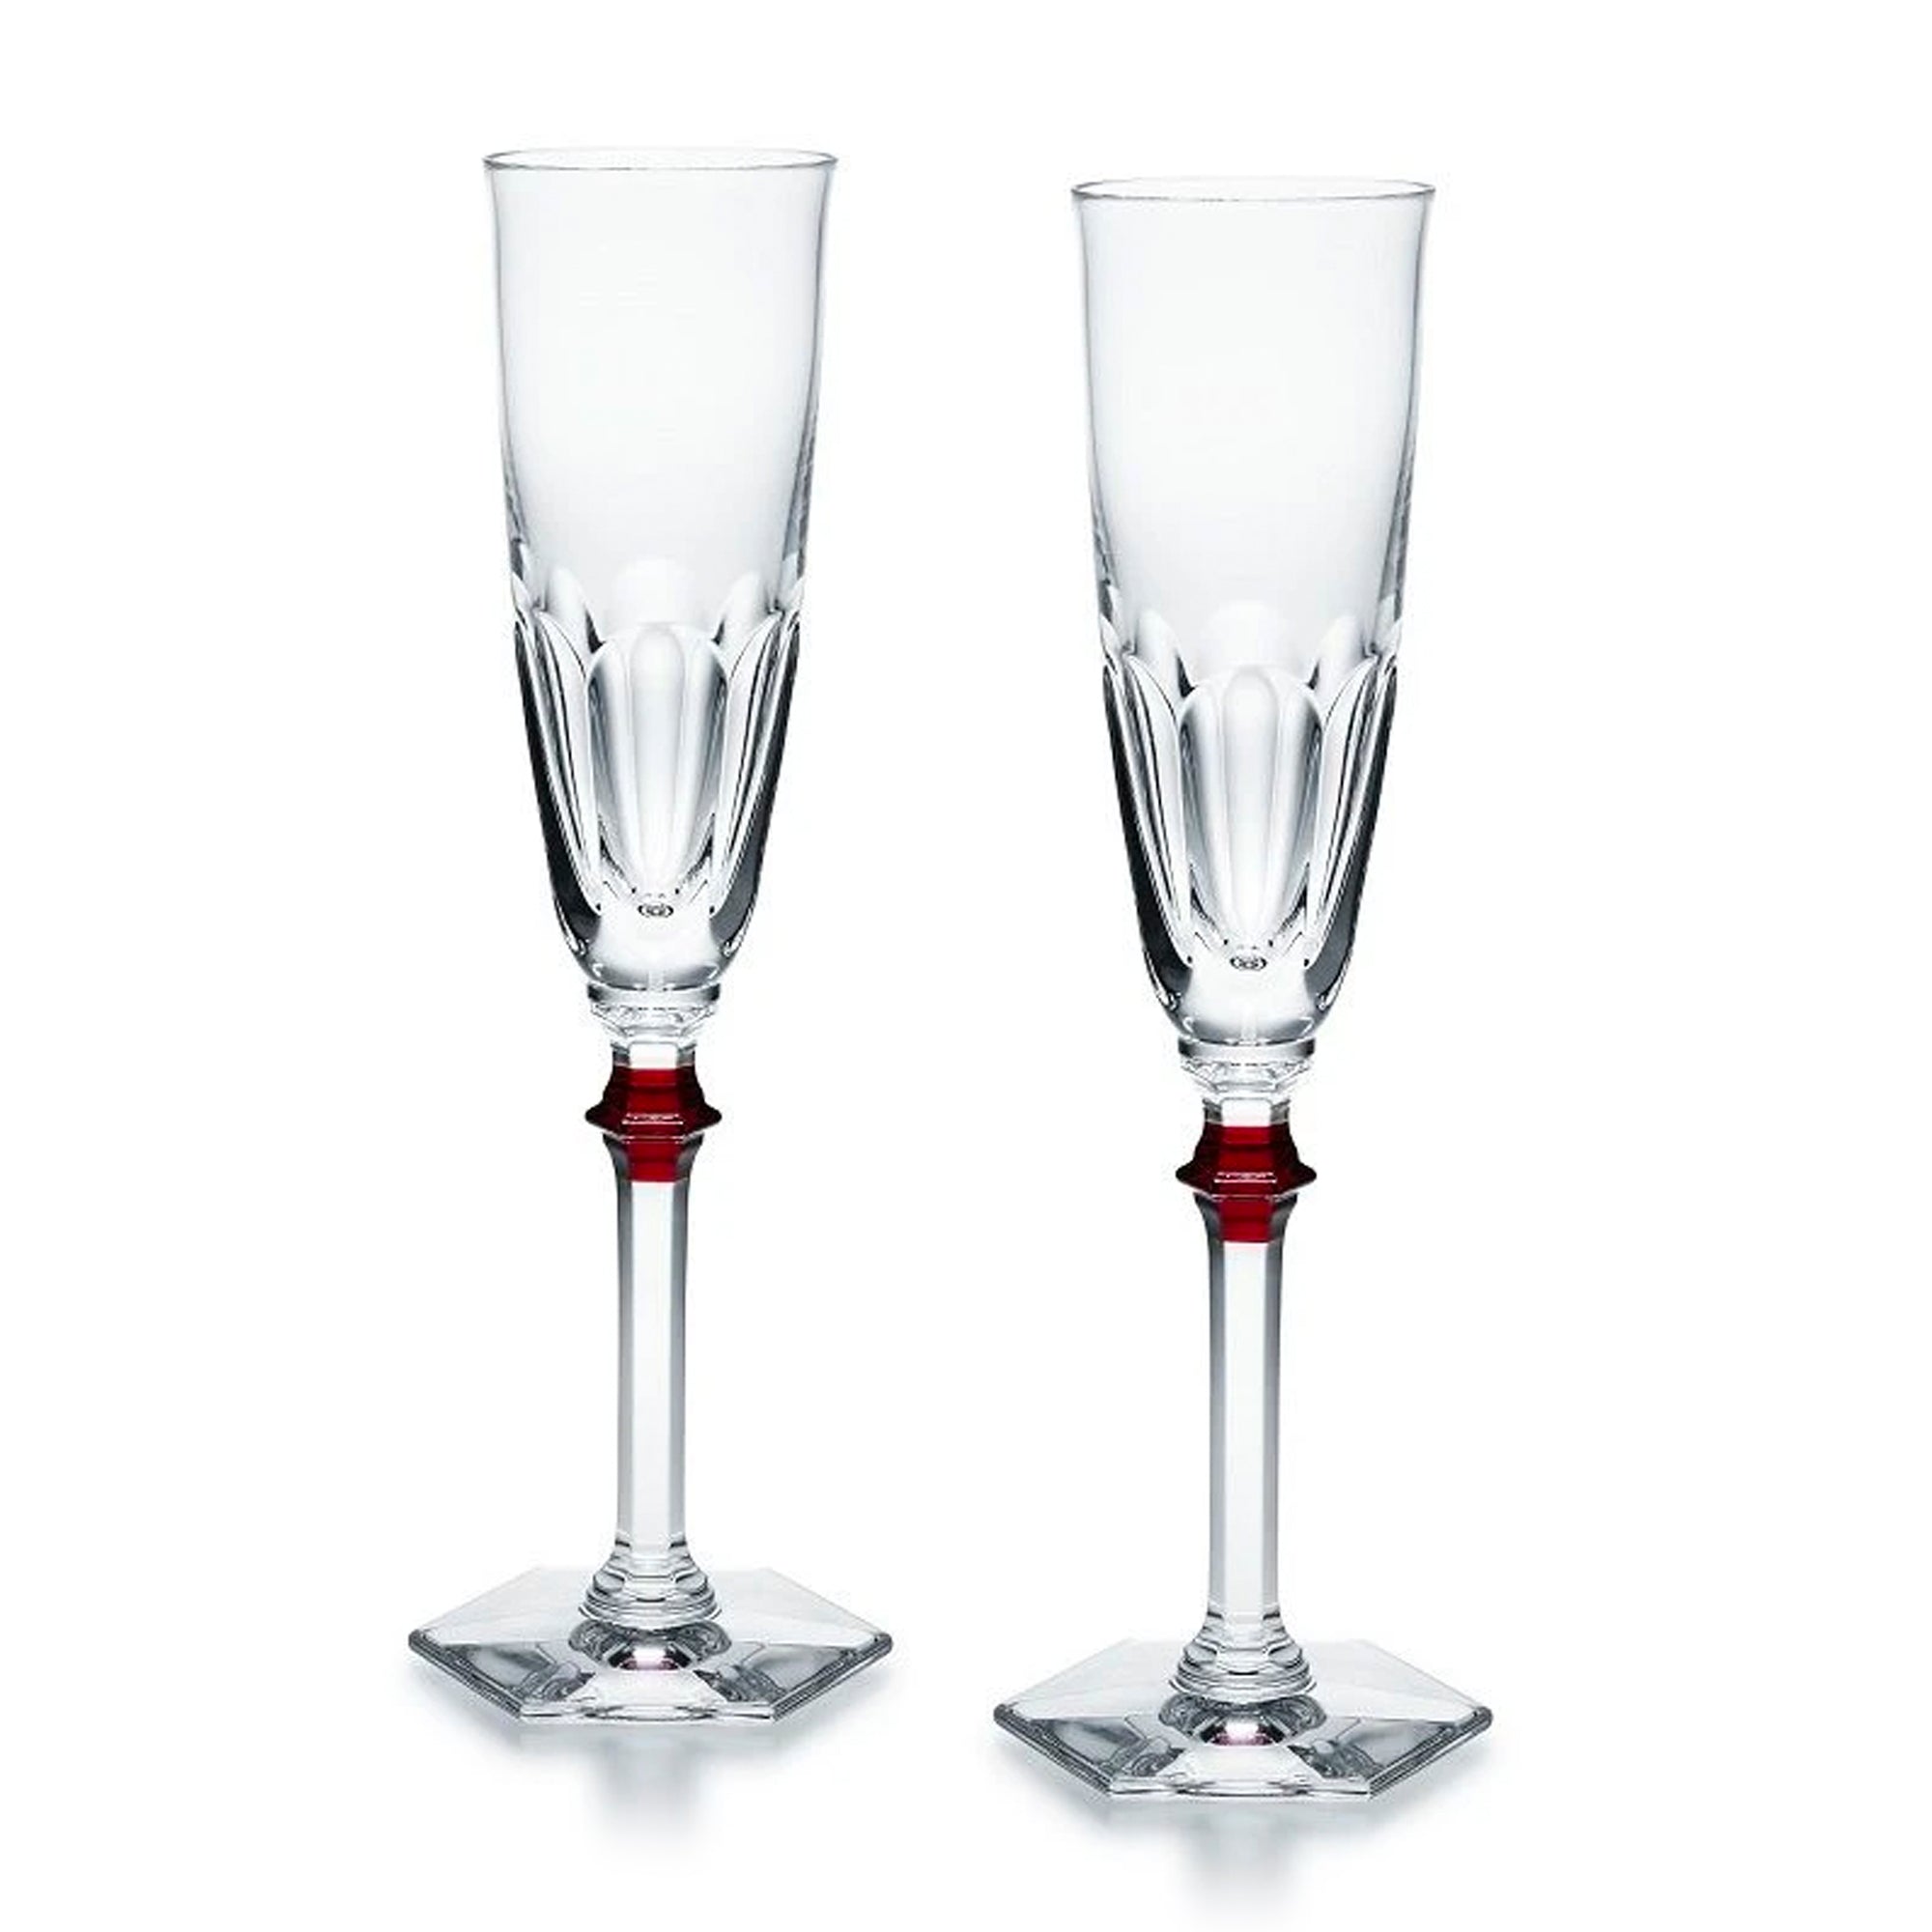 Baccarat Set of 2 Chateau Baccarat Red Wine Glasses - Jung Lee NY